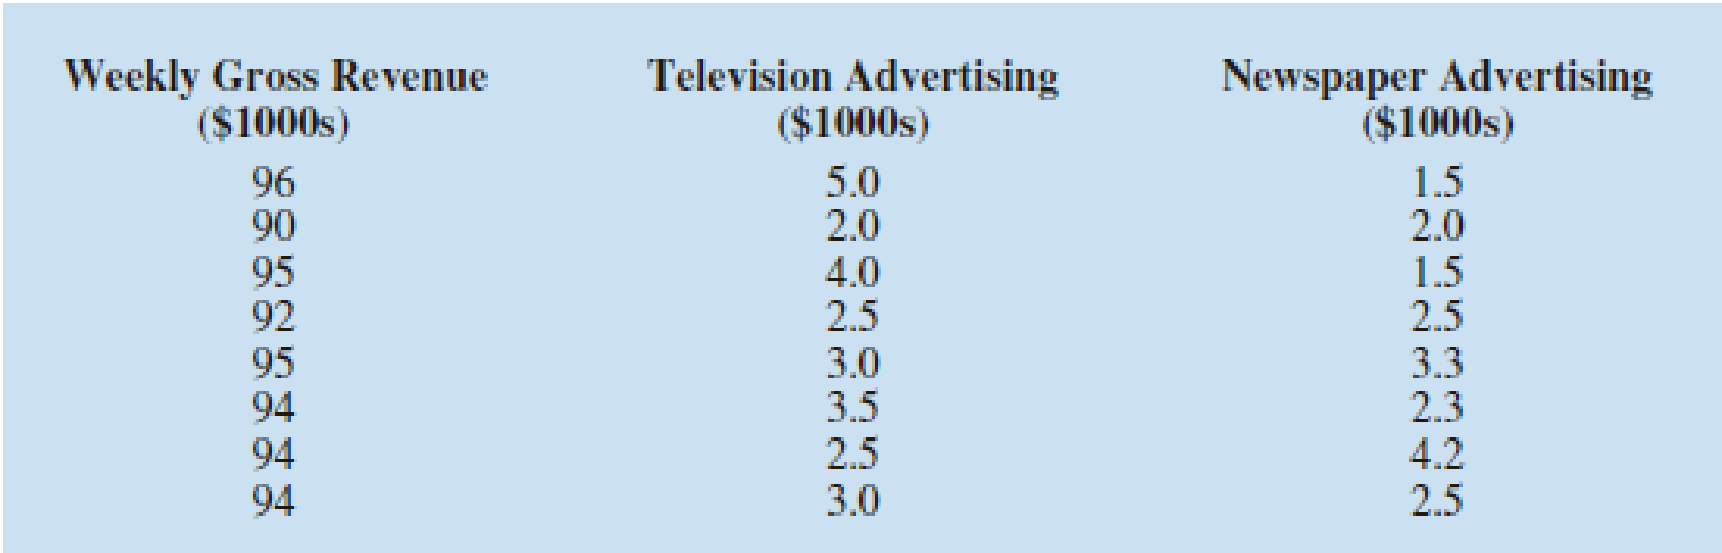 Chapter 15.8, Problem 41E, Exercise 5 gave the following data on weekly gross revenue ($1000s), television advertising 